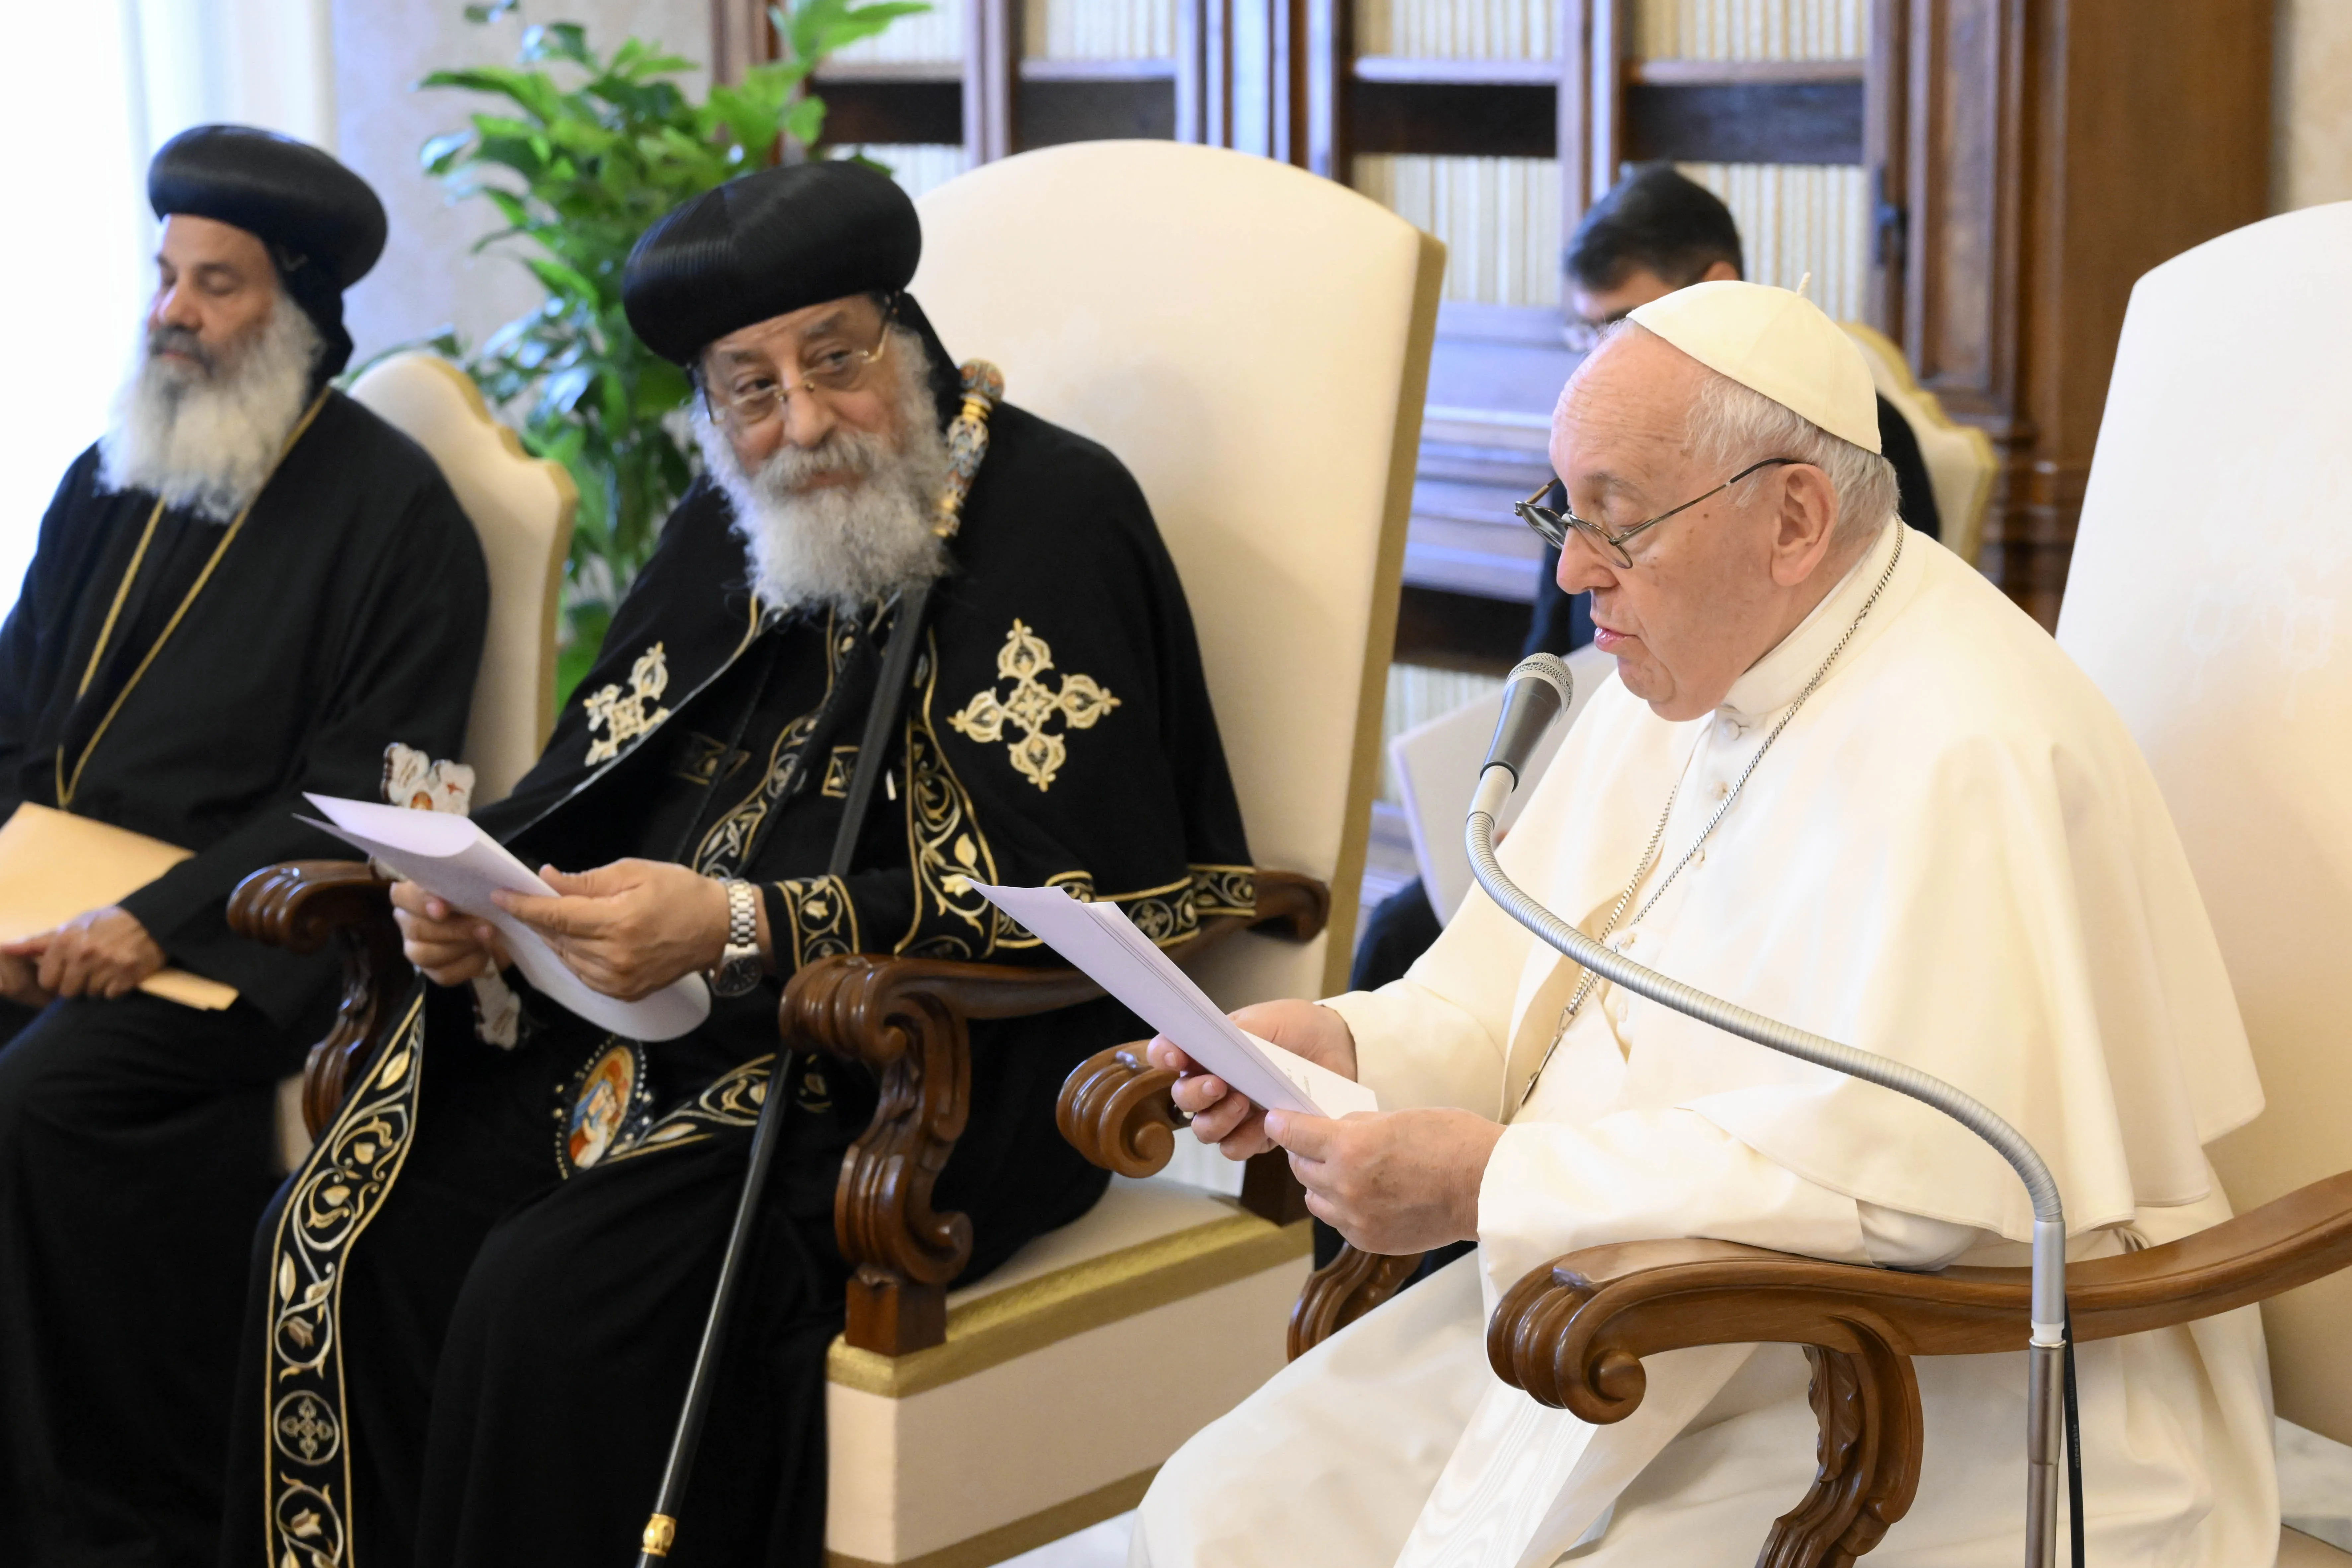 In a speech during a meeting with Pope Tawadros II, the head of the Coptic Orthodox Church of Alexandria, and other Coptic Orthodox representatives on May 11, 2023, Pope Francis announced that the Coptic Orthodox martyrs killed by ISIS in 2015 will be added to the Catholic Church’s official list of saints.?w=200&h=150